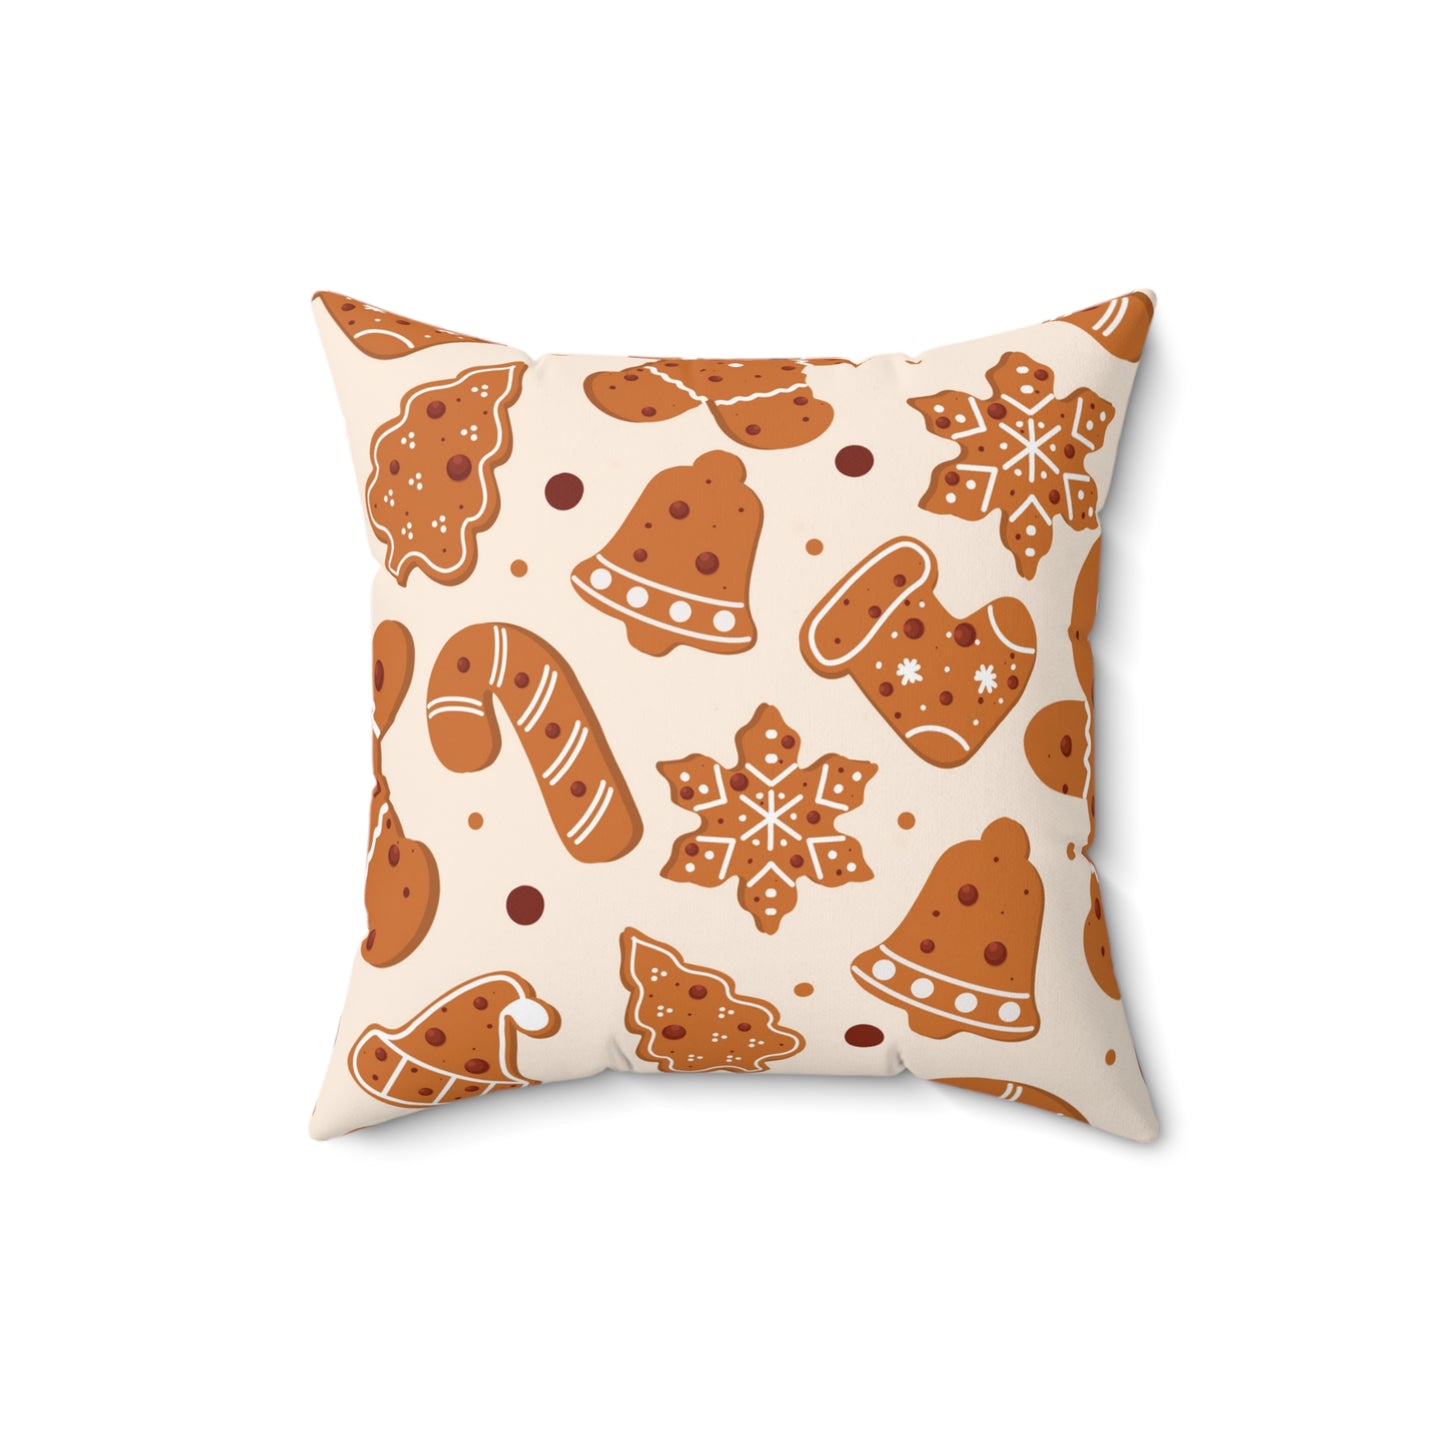 Warm Gingerbread Cookies Square Pillow